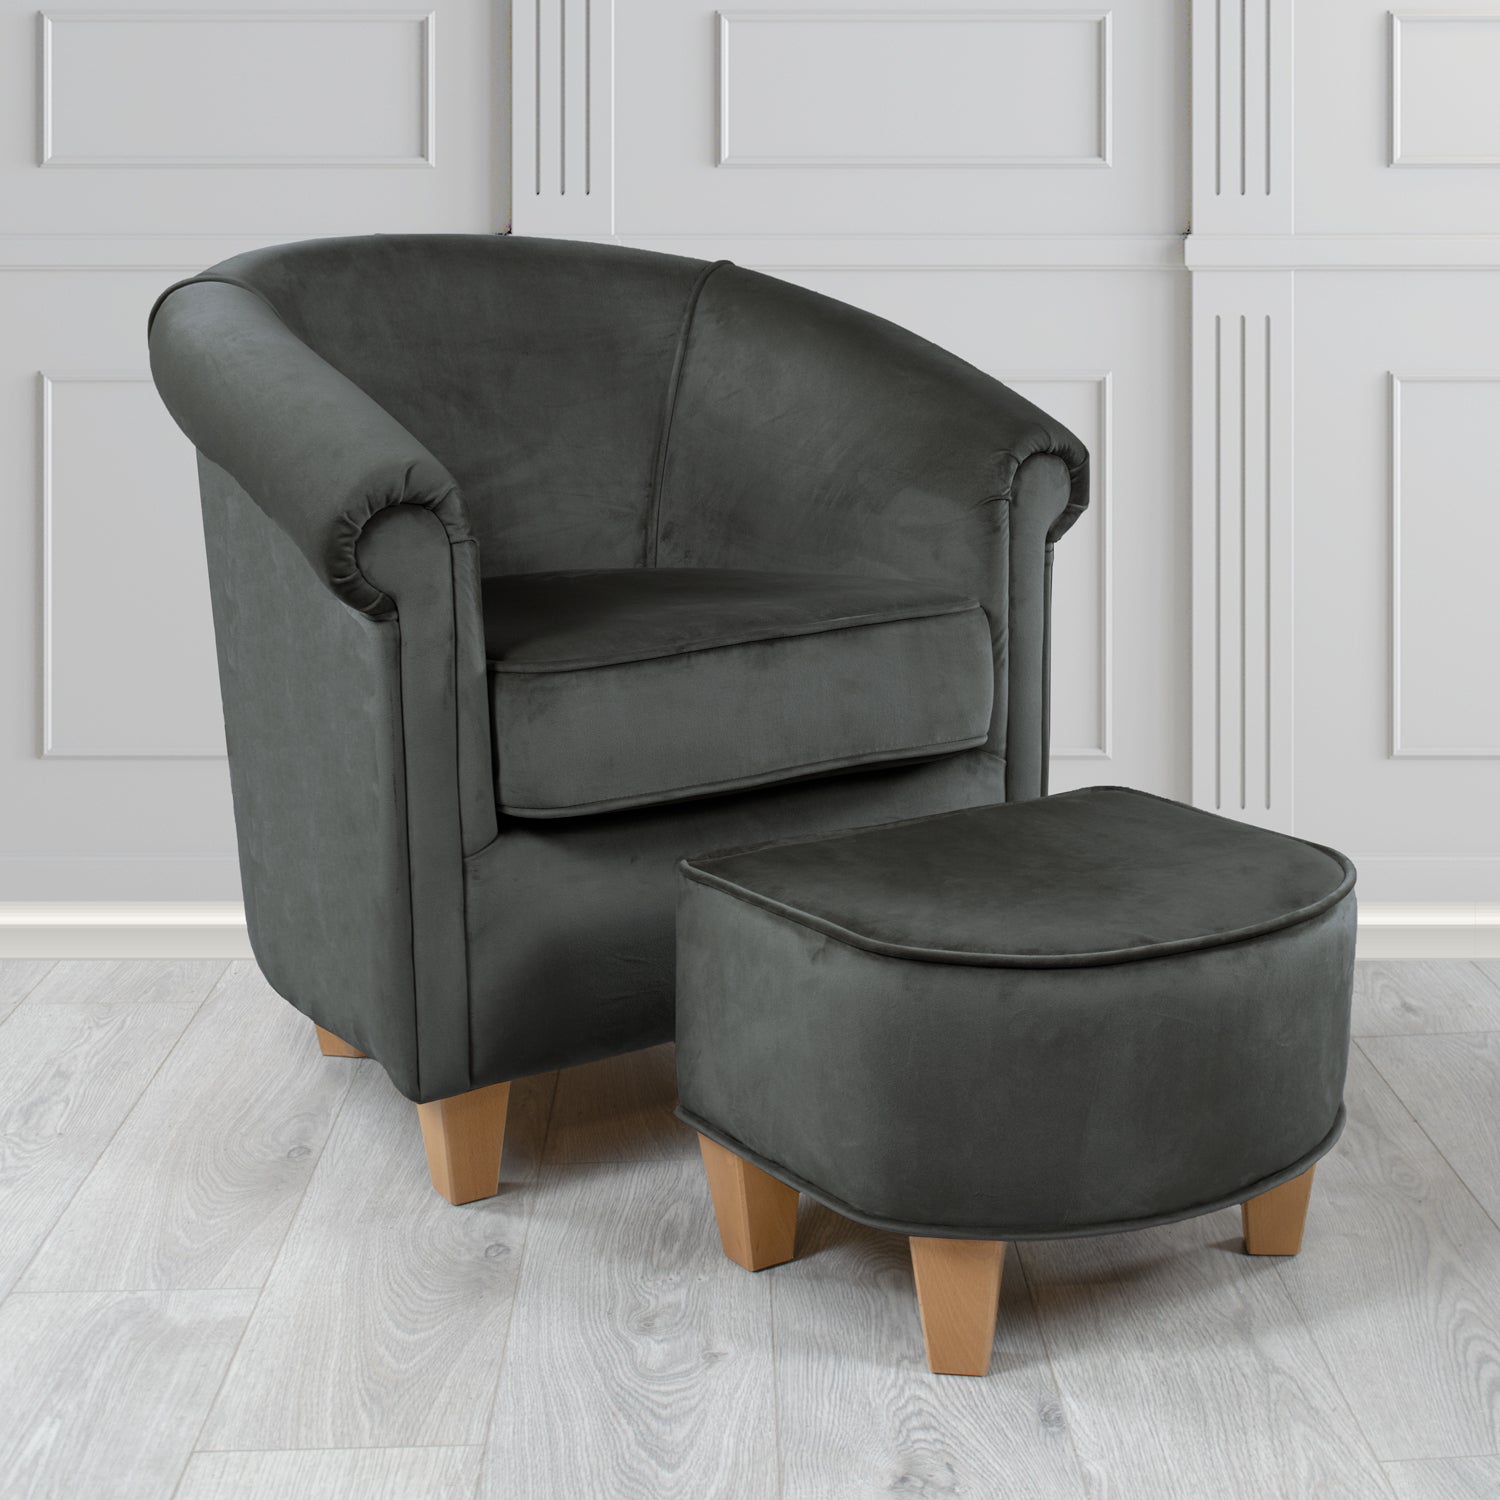 Siena Passione Charcoal PAS2733 Velvet Fabric Tub Chair & Footstool Set (4680408924202)